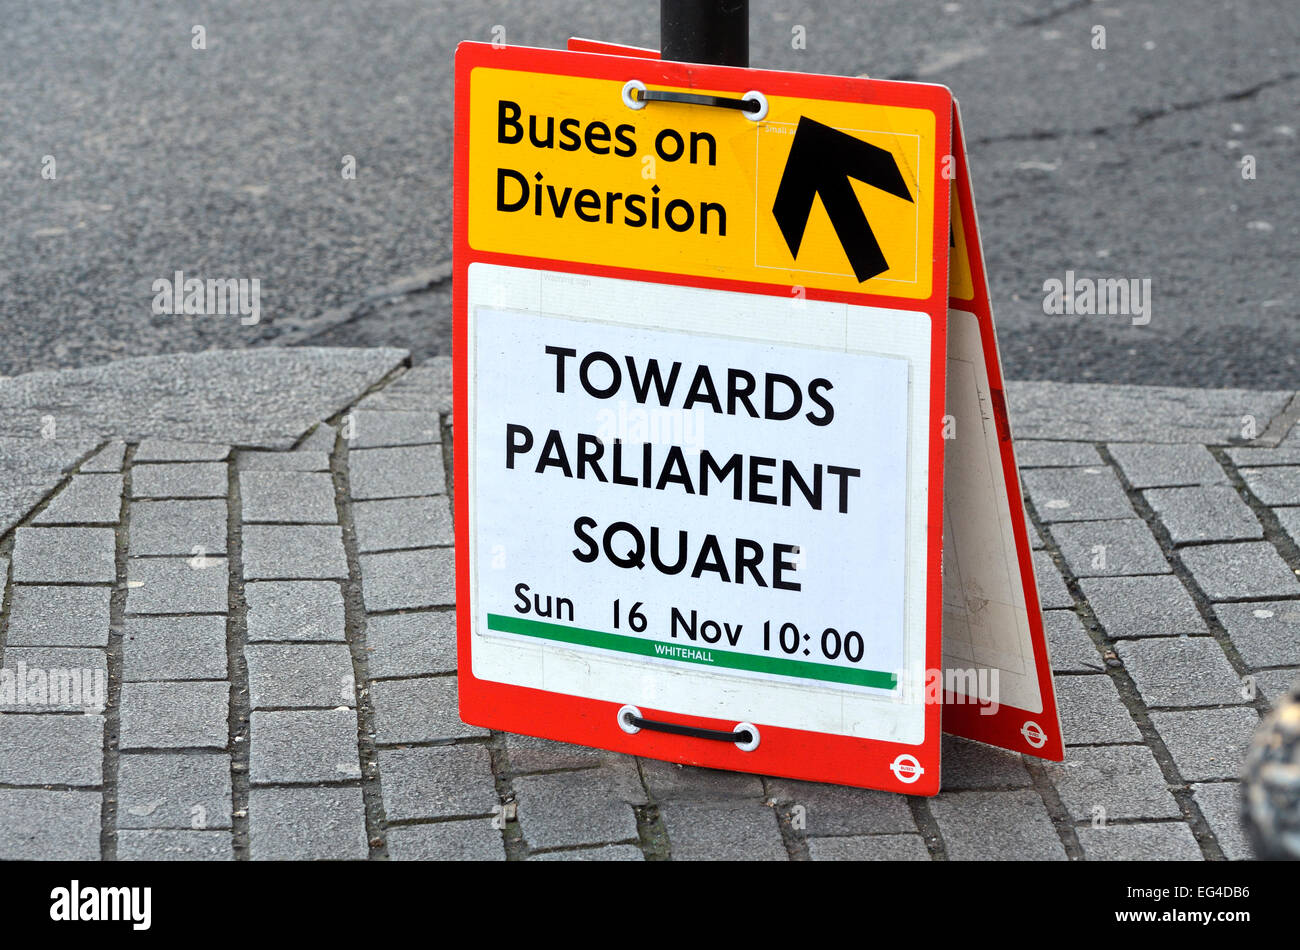 London, England, UK. Notice of diversion for buses Stock Photo